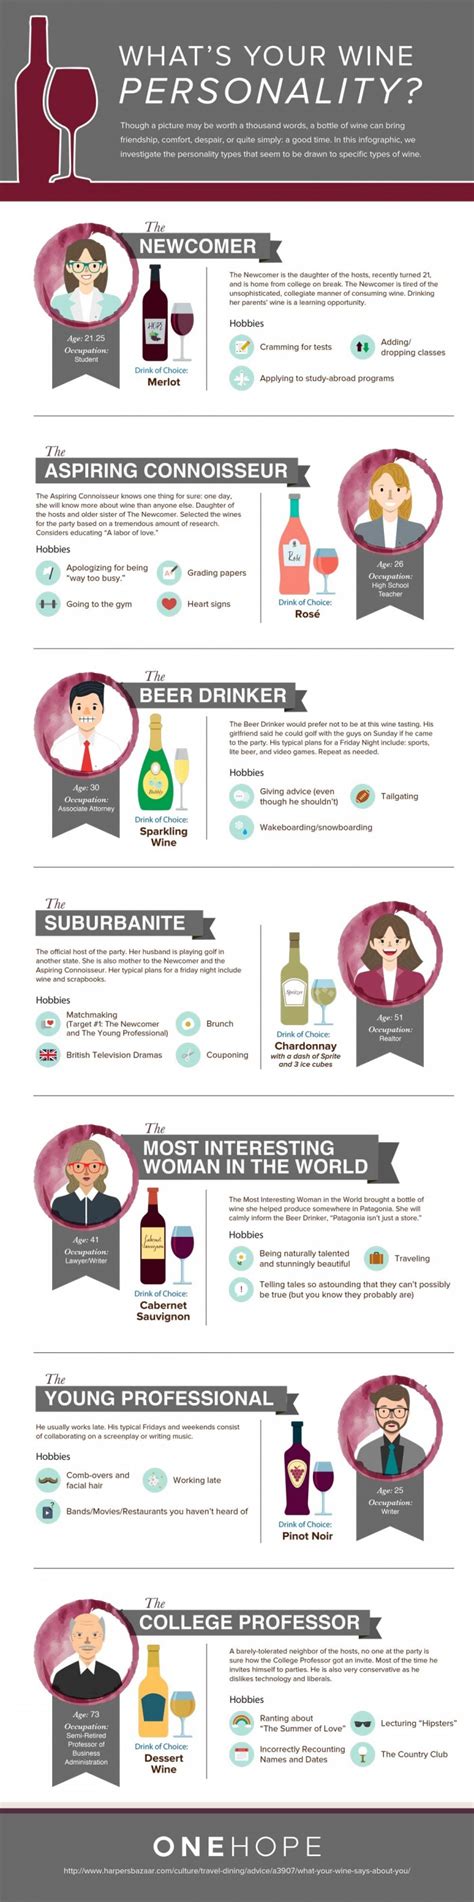 Discovering Your Wine Personality: Embarking on a Journey to Find Your Ideal White Wine